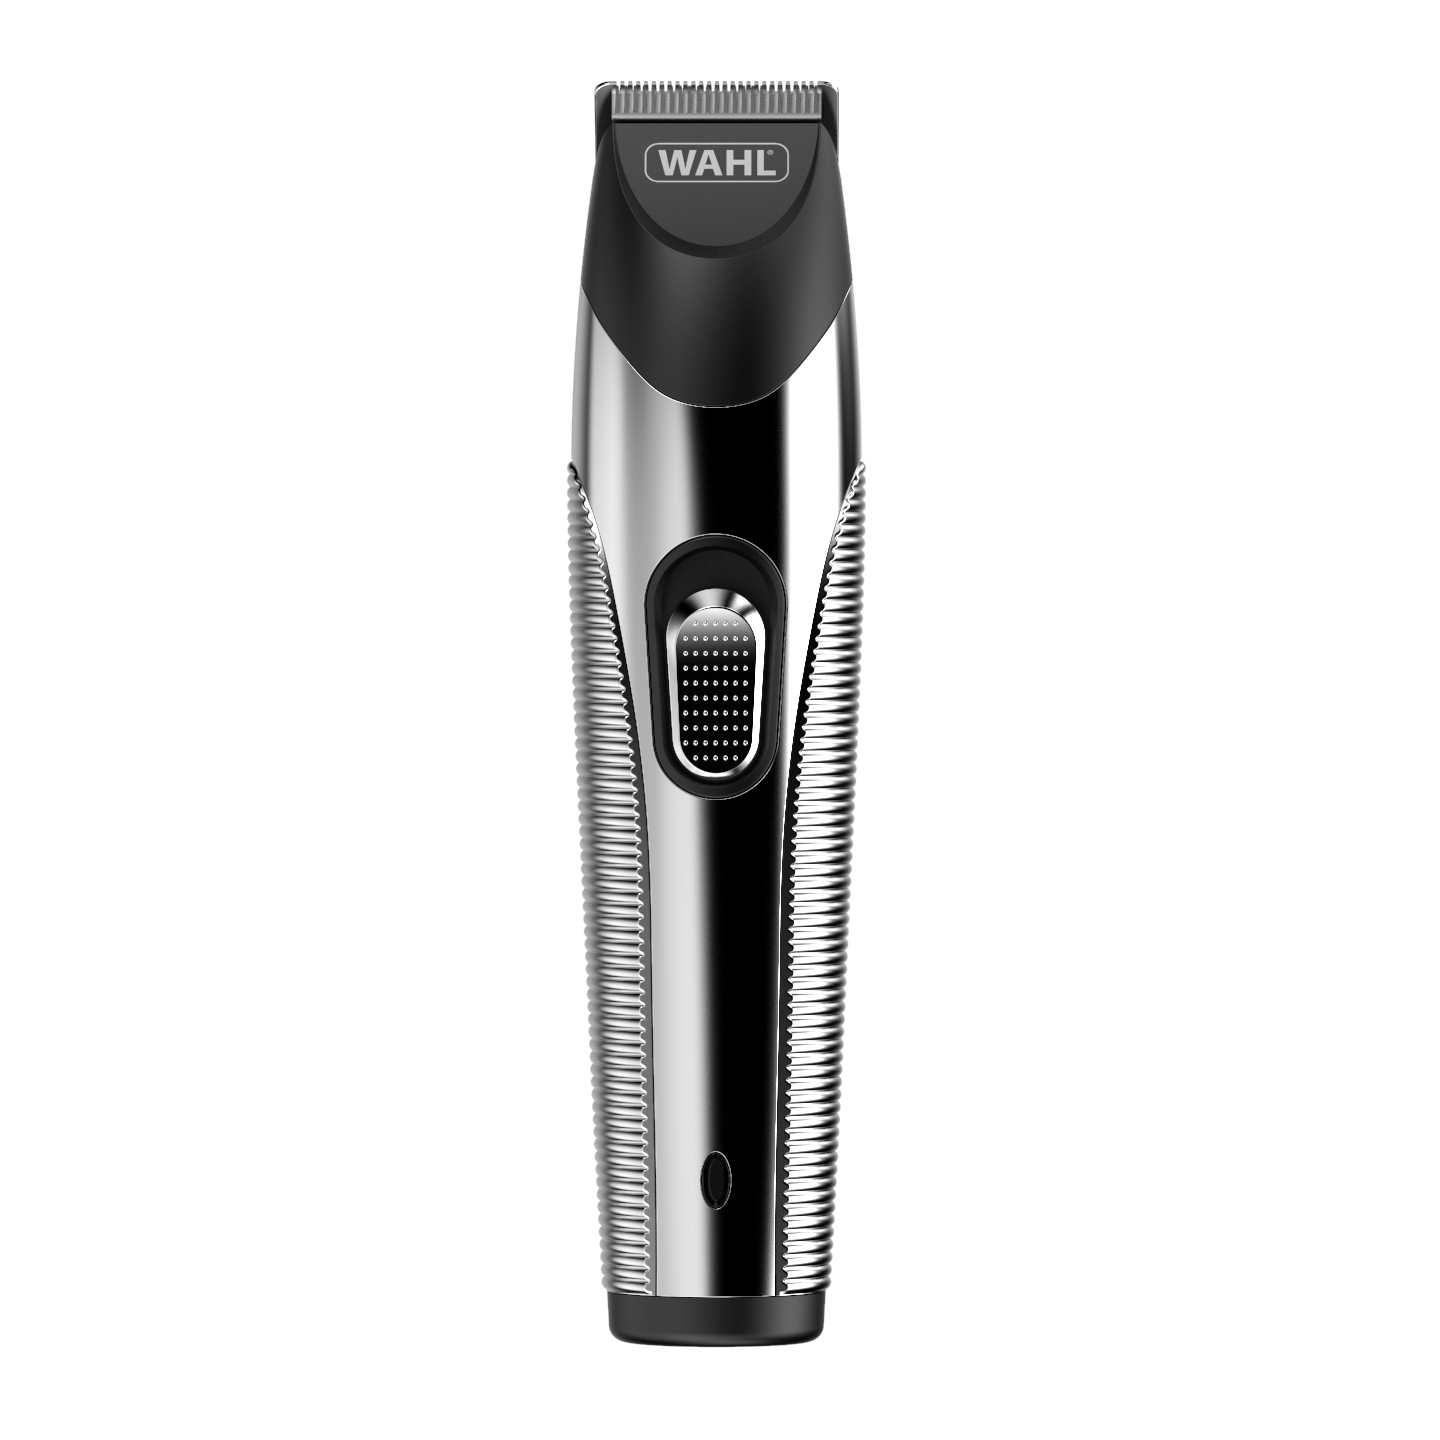 cordless trimmer